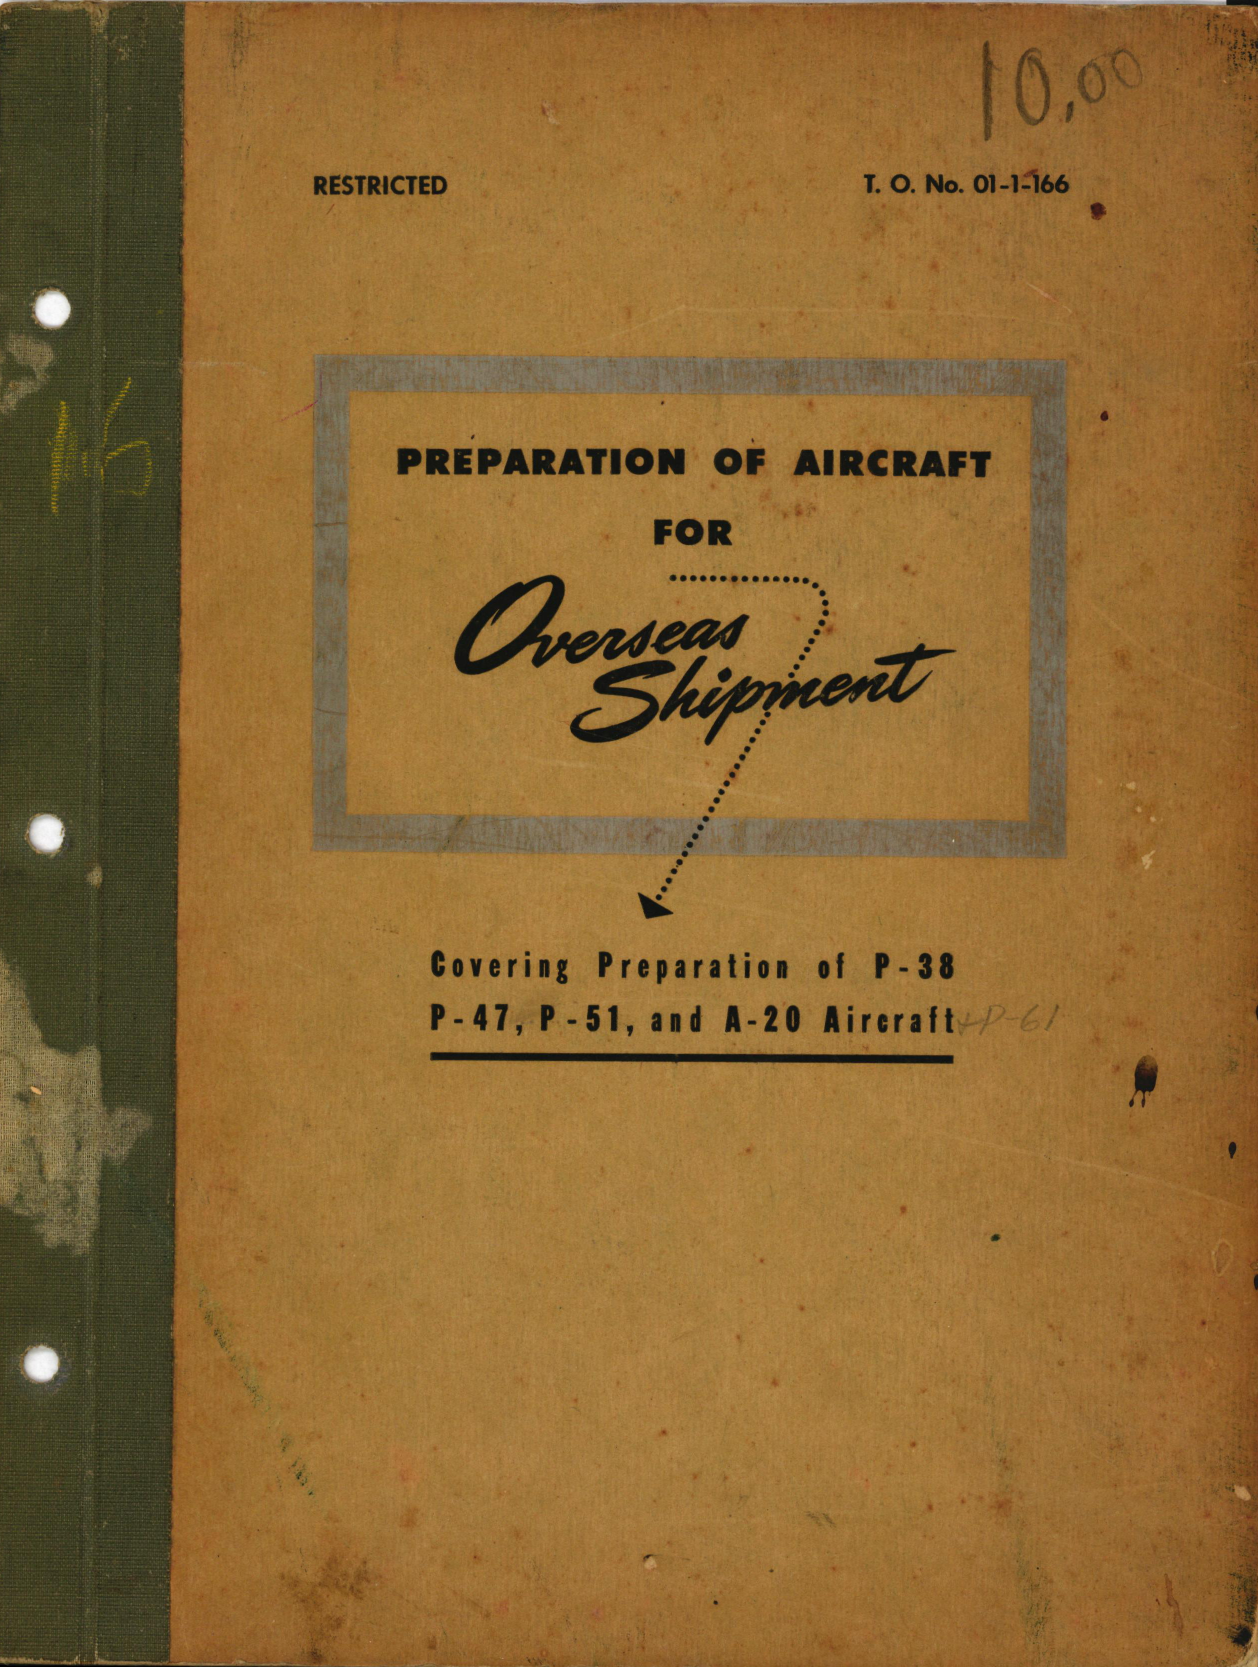 Sample page 1 from AirCorps Library document: Preparation for Overseas Shipment for P-38, P-47, P-51, A-20, and P-61